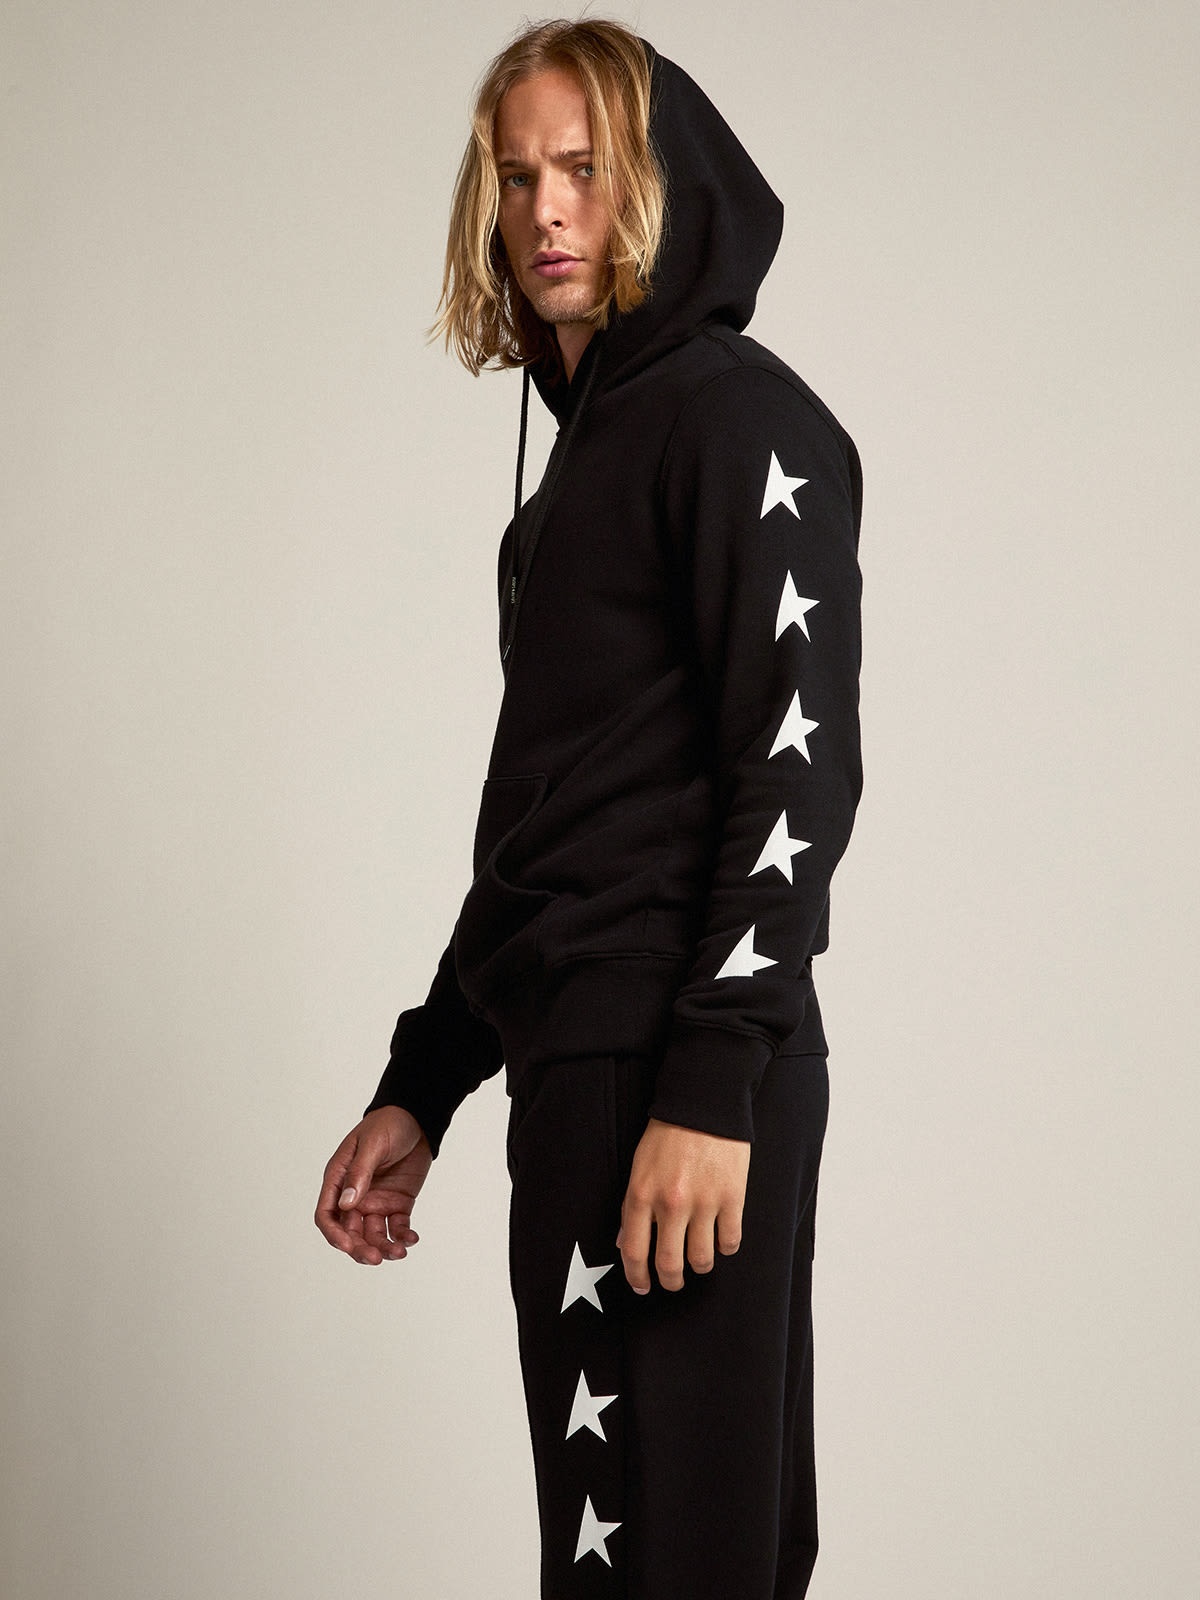 Black Alighiero Star Collection sweatshirt with contrasting white stars - 3